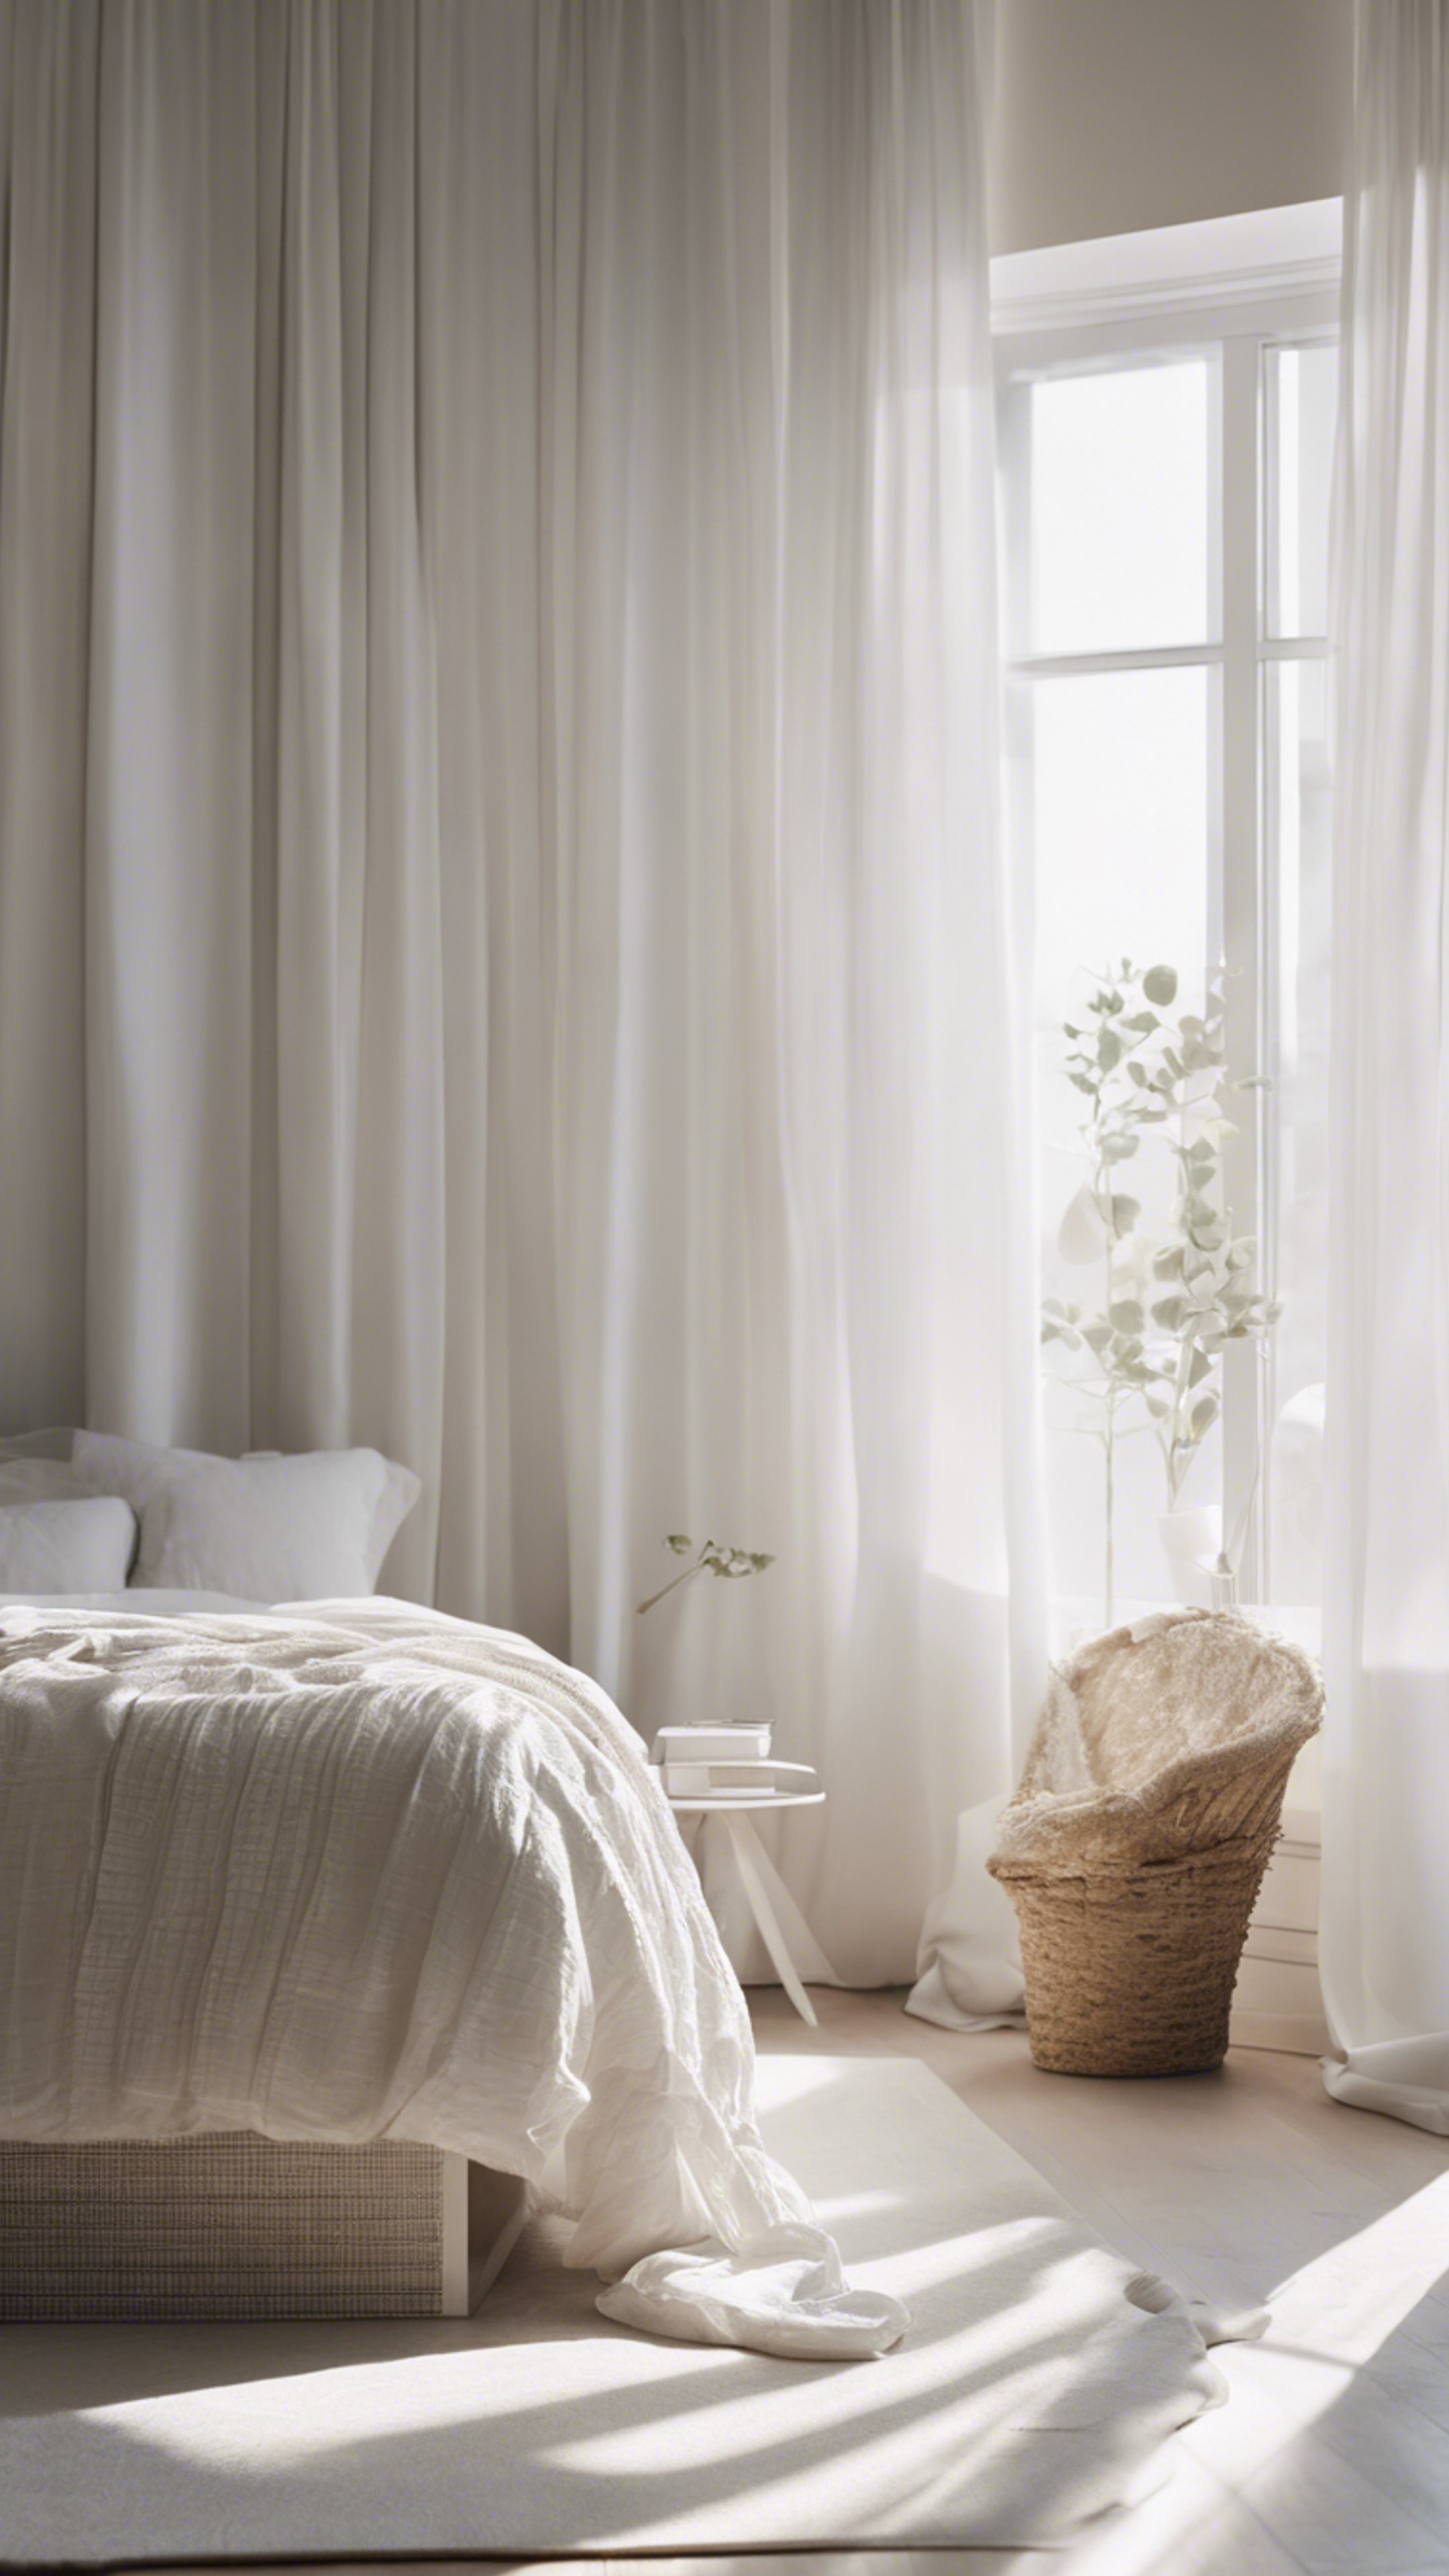 A serene white bedroom with a minimalist aesthetic, sunlight streaming through sheer curtains Behang[e50a9fa27884450ea562]